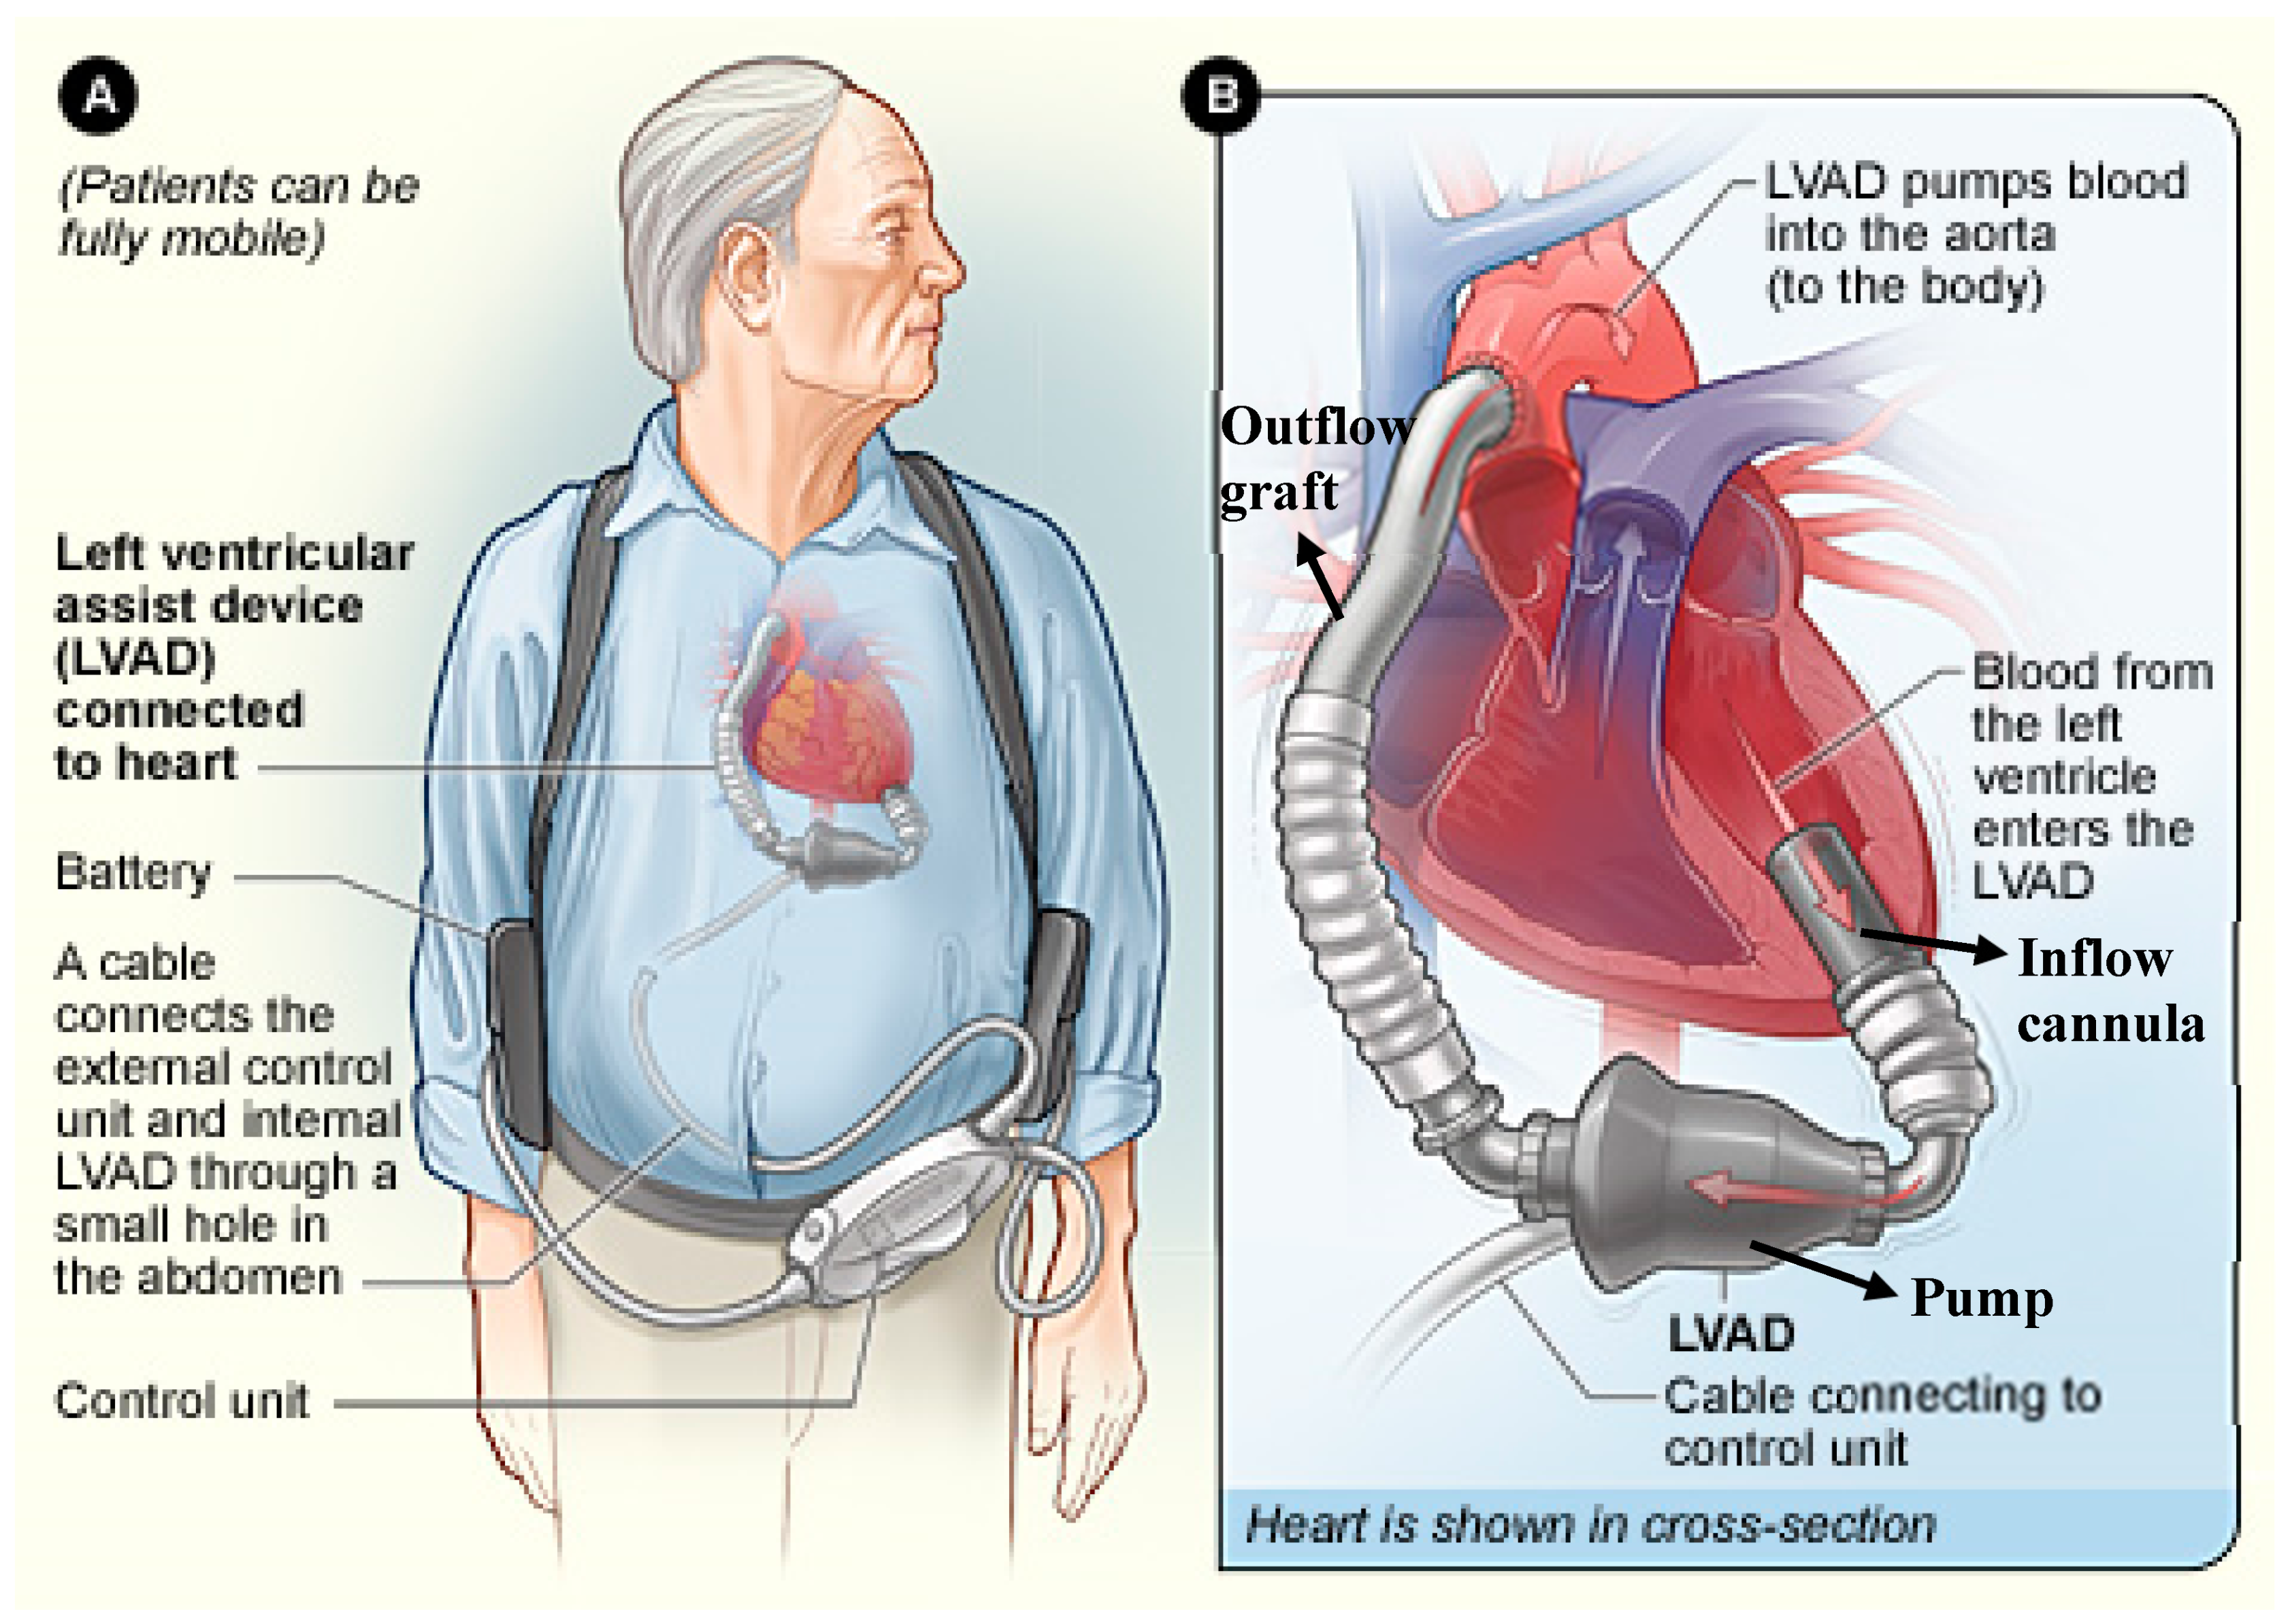 LVAD Back Pack, Water resistant, One Size Fits All